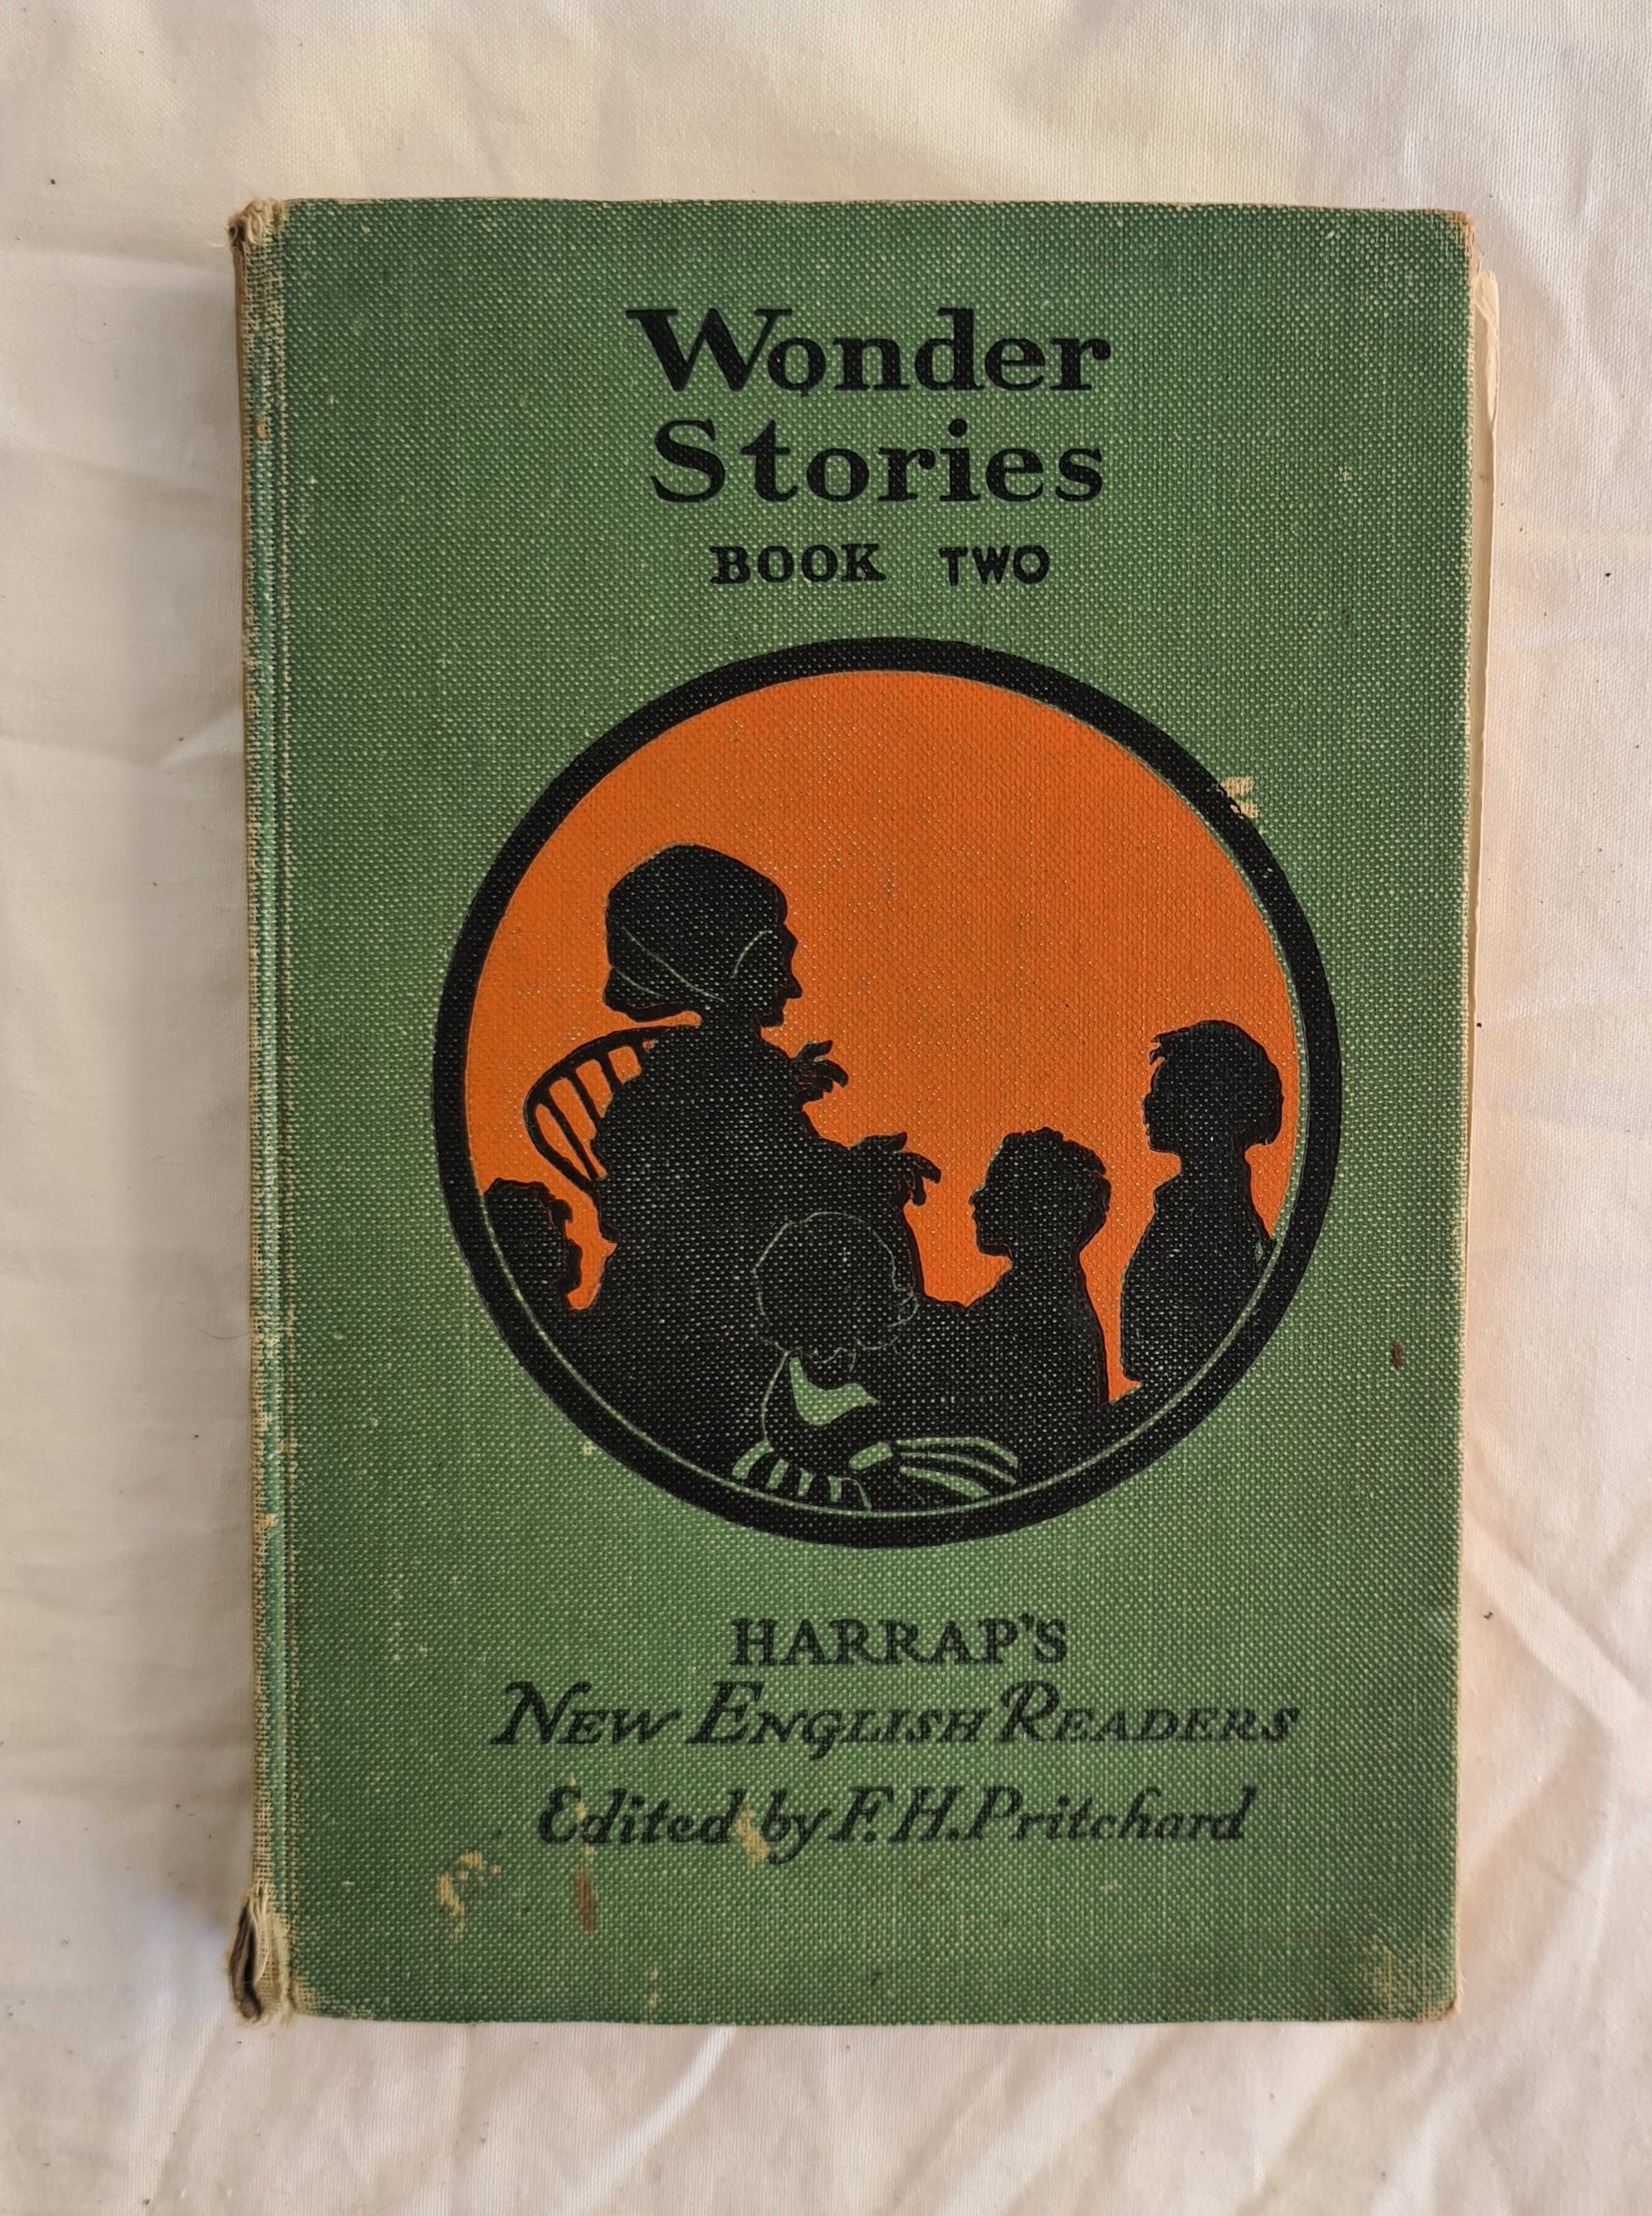 Wonder Stories  Book Two  Edited by F. H. Pritchard  Harap’s New English Readers for Junior Schools